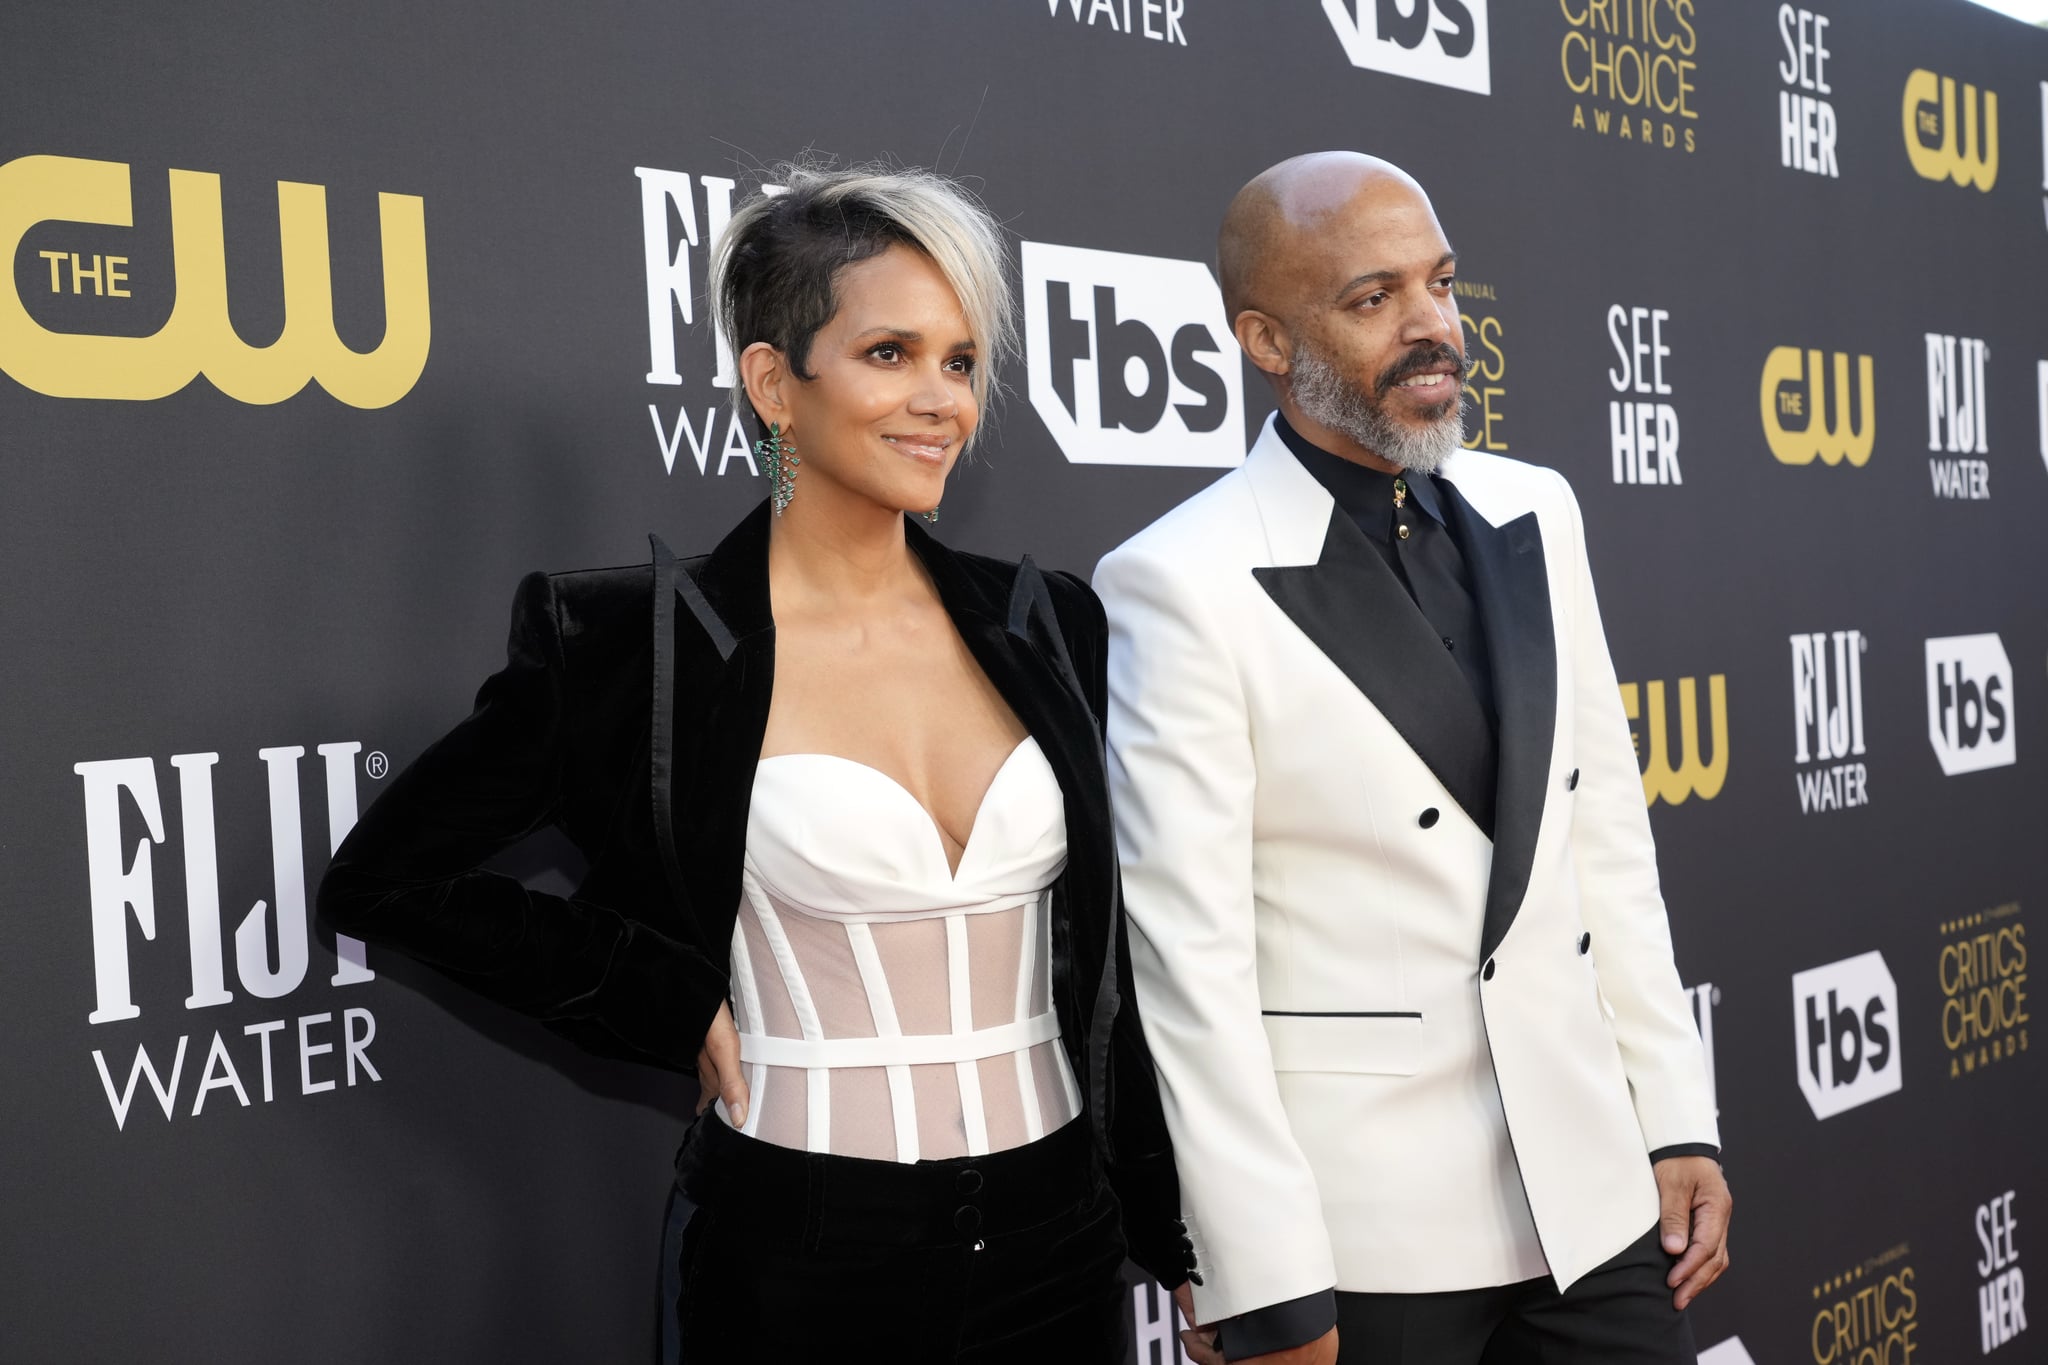 LOS ANGELES, CALIFORNIA - MARCH 13: Halle Berry and Van Hunt attend the 27th Annual Critics Choice Awards at Fairmont Century Plaza on March 13, 2022 in Los Angeles, California. (Photo by Kevin Mazur/Getty Images for Critics Choice Association)